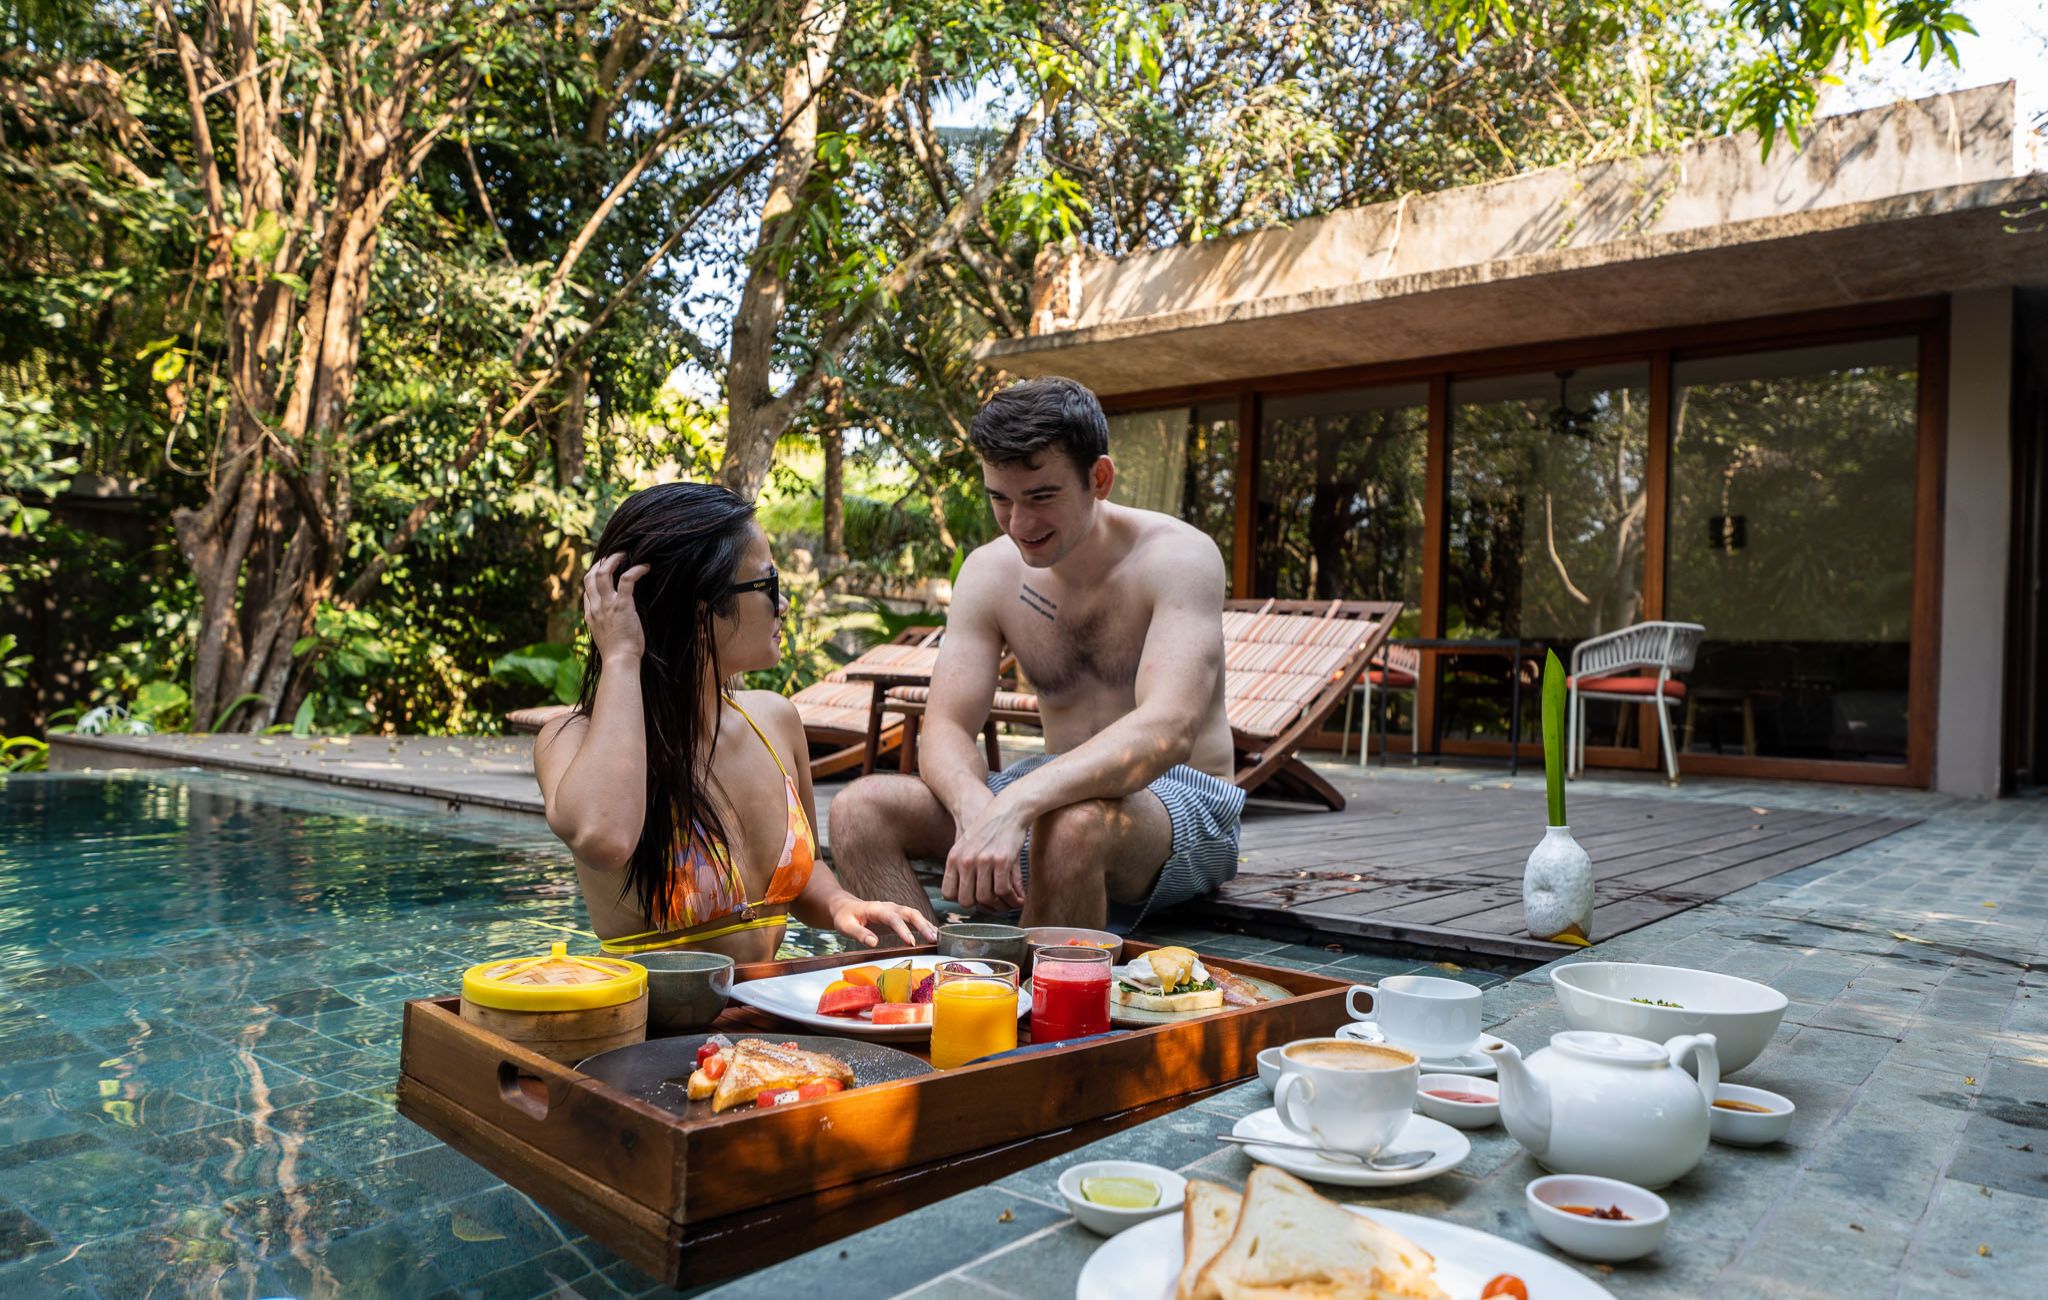 Couple enjoying a floating breakfast in the pool at Templation, a luxury hotel in Siem Reap, Cambodia.